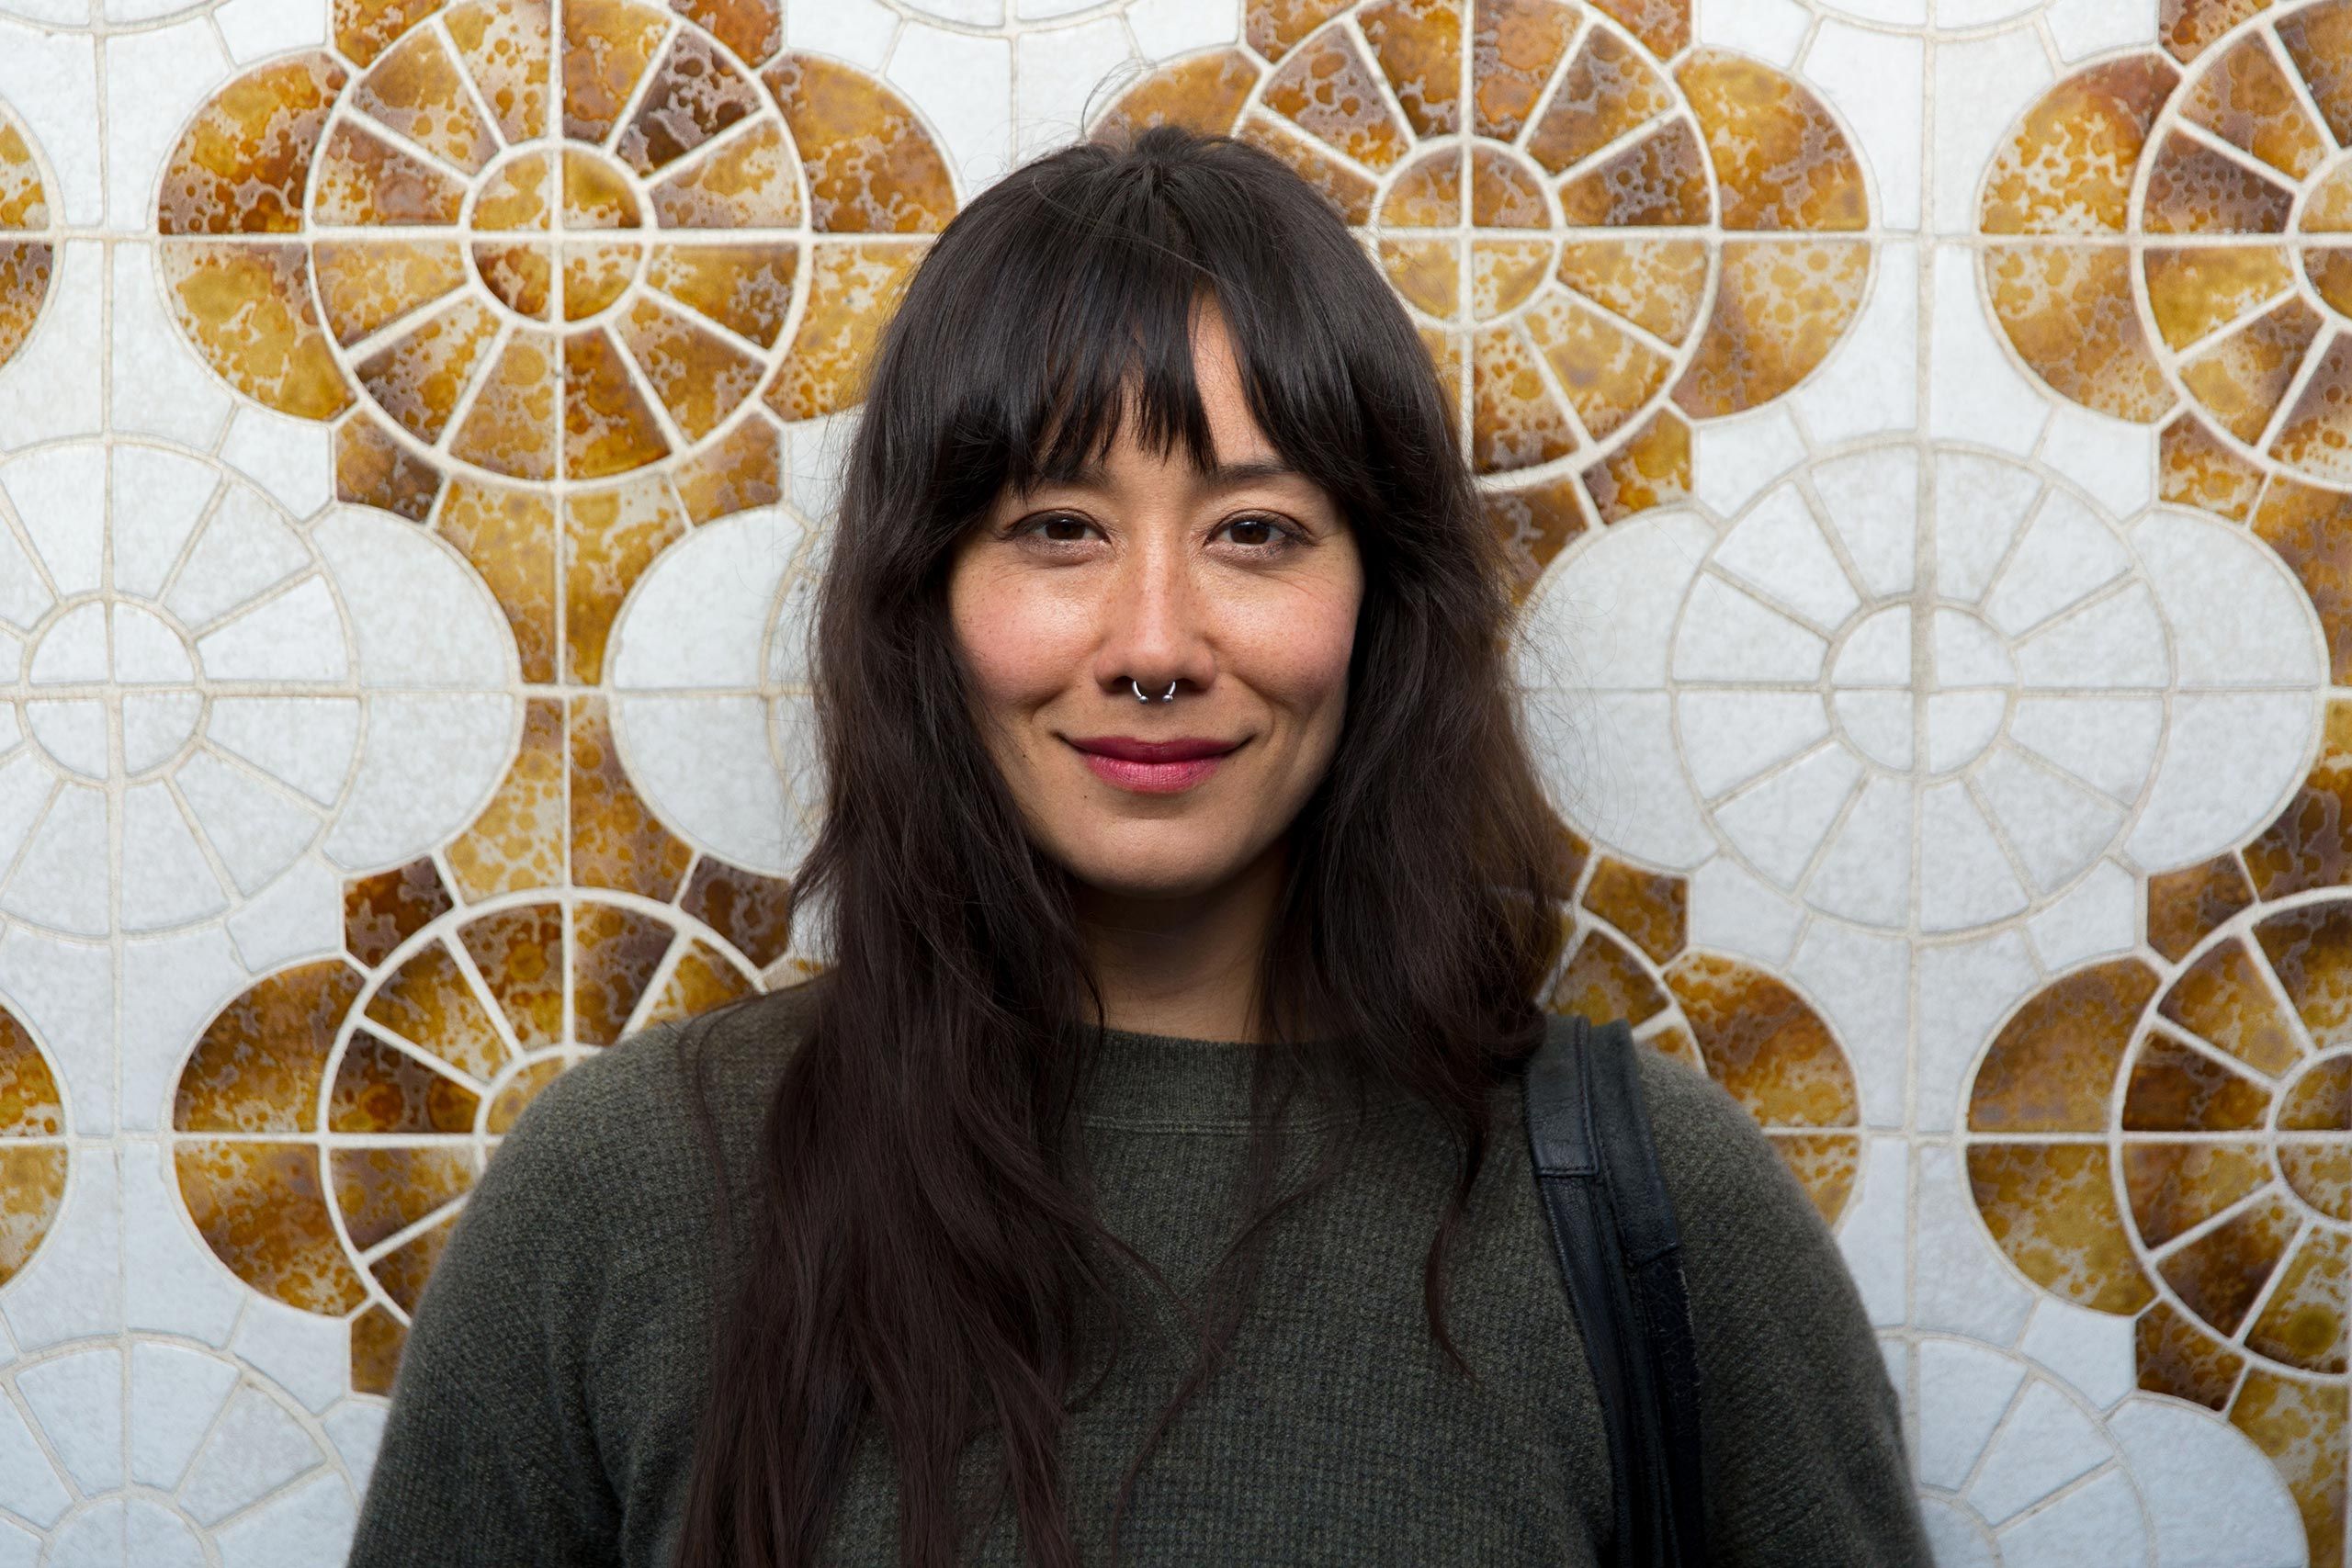 Woman Smiling in Front of a Tiled Wall